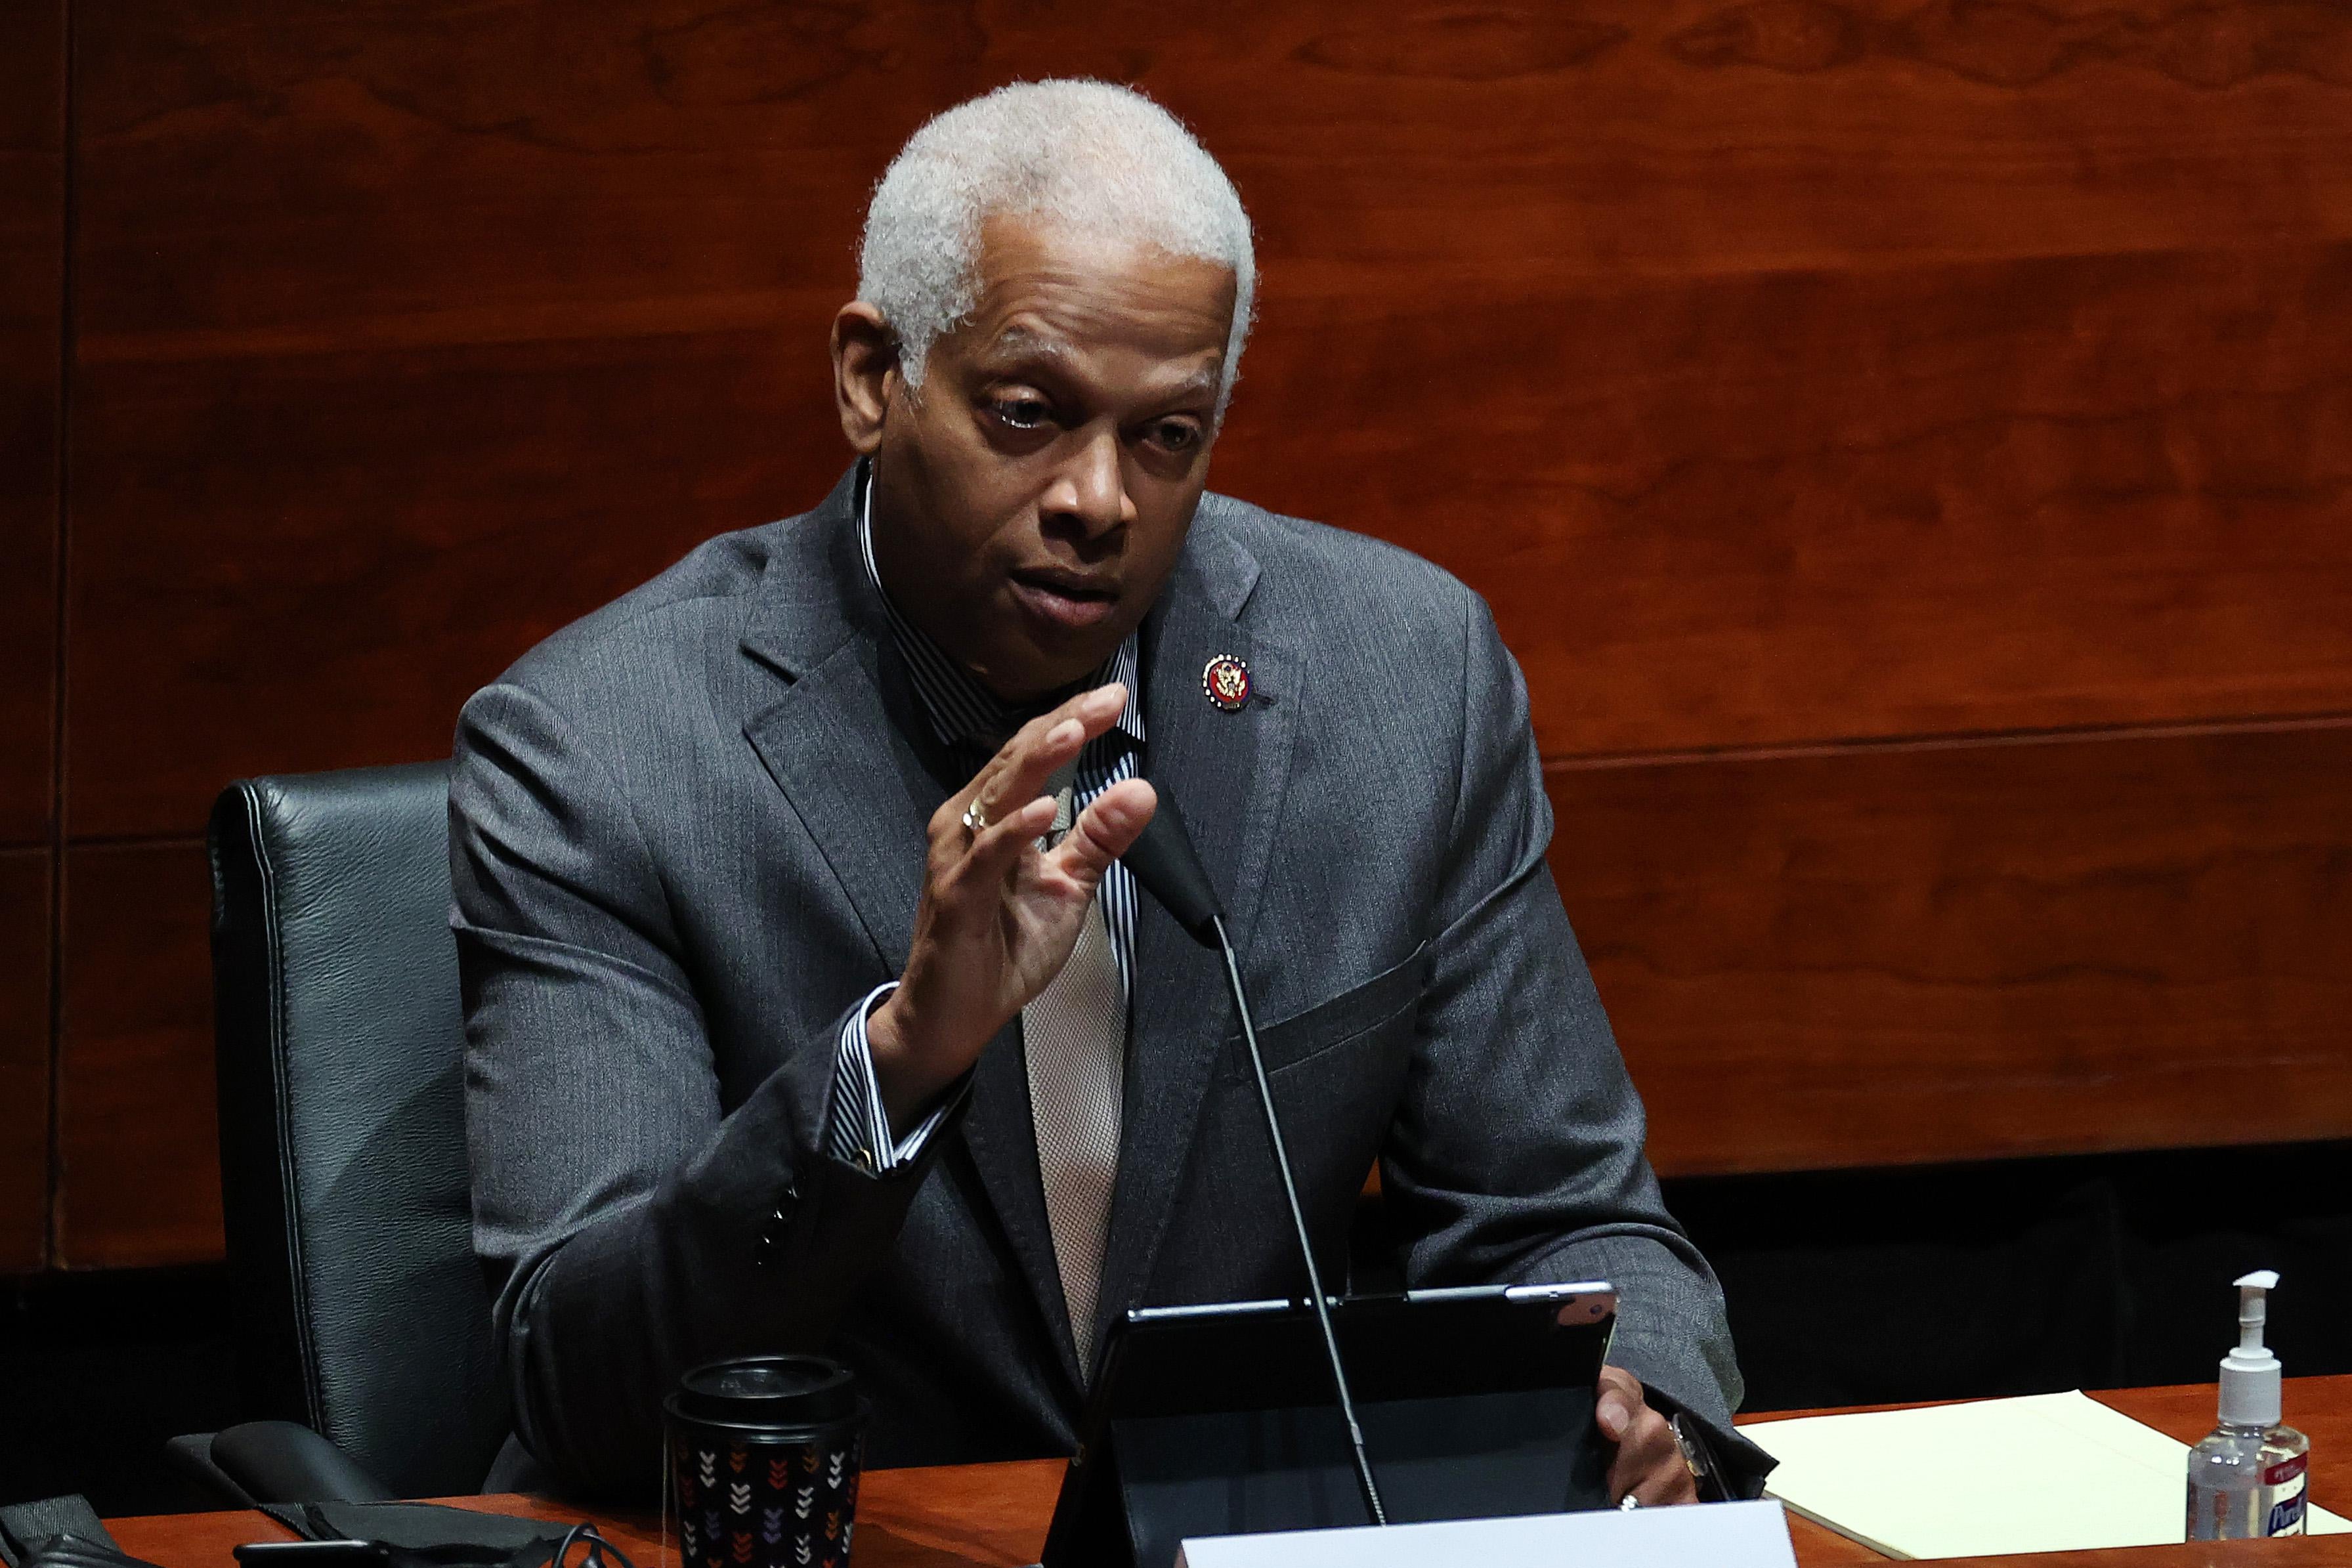 Rep. Hank Johnson speaks into a mic during a congressional hearing.